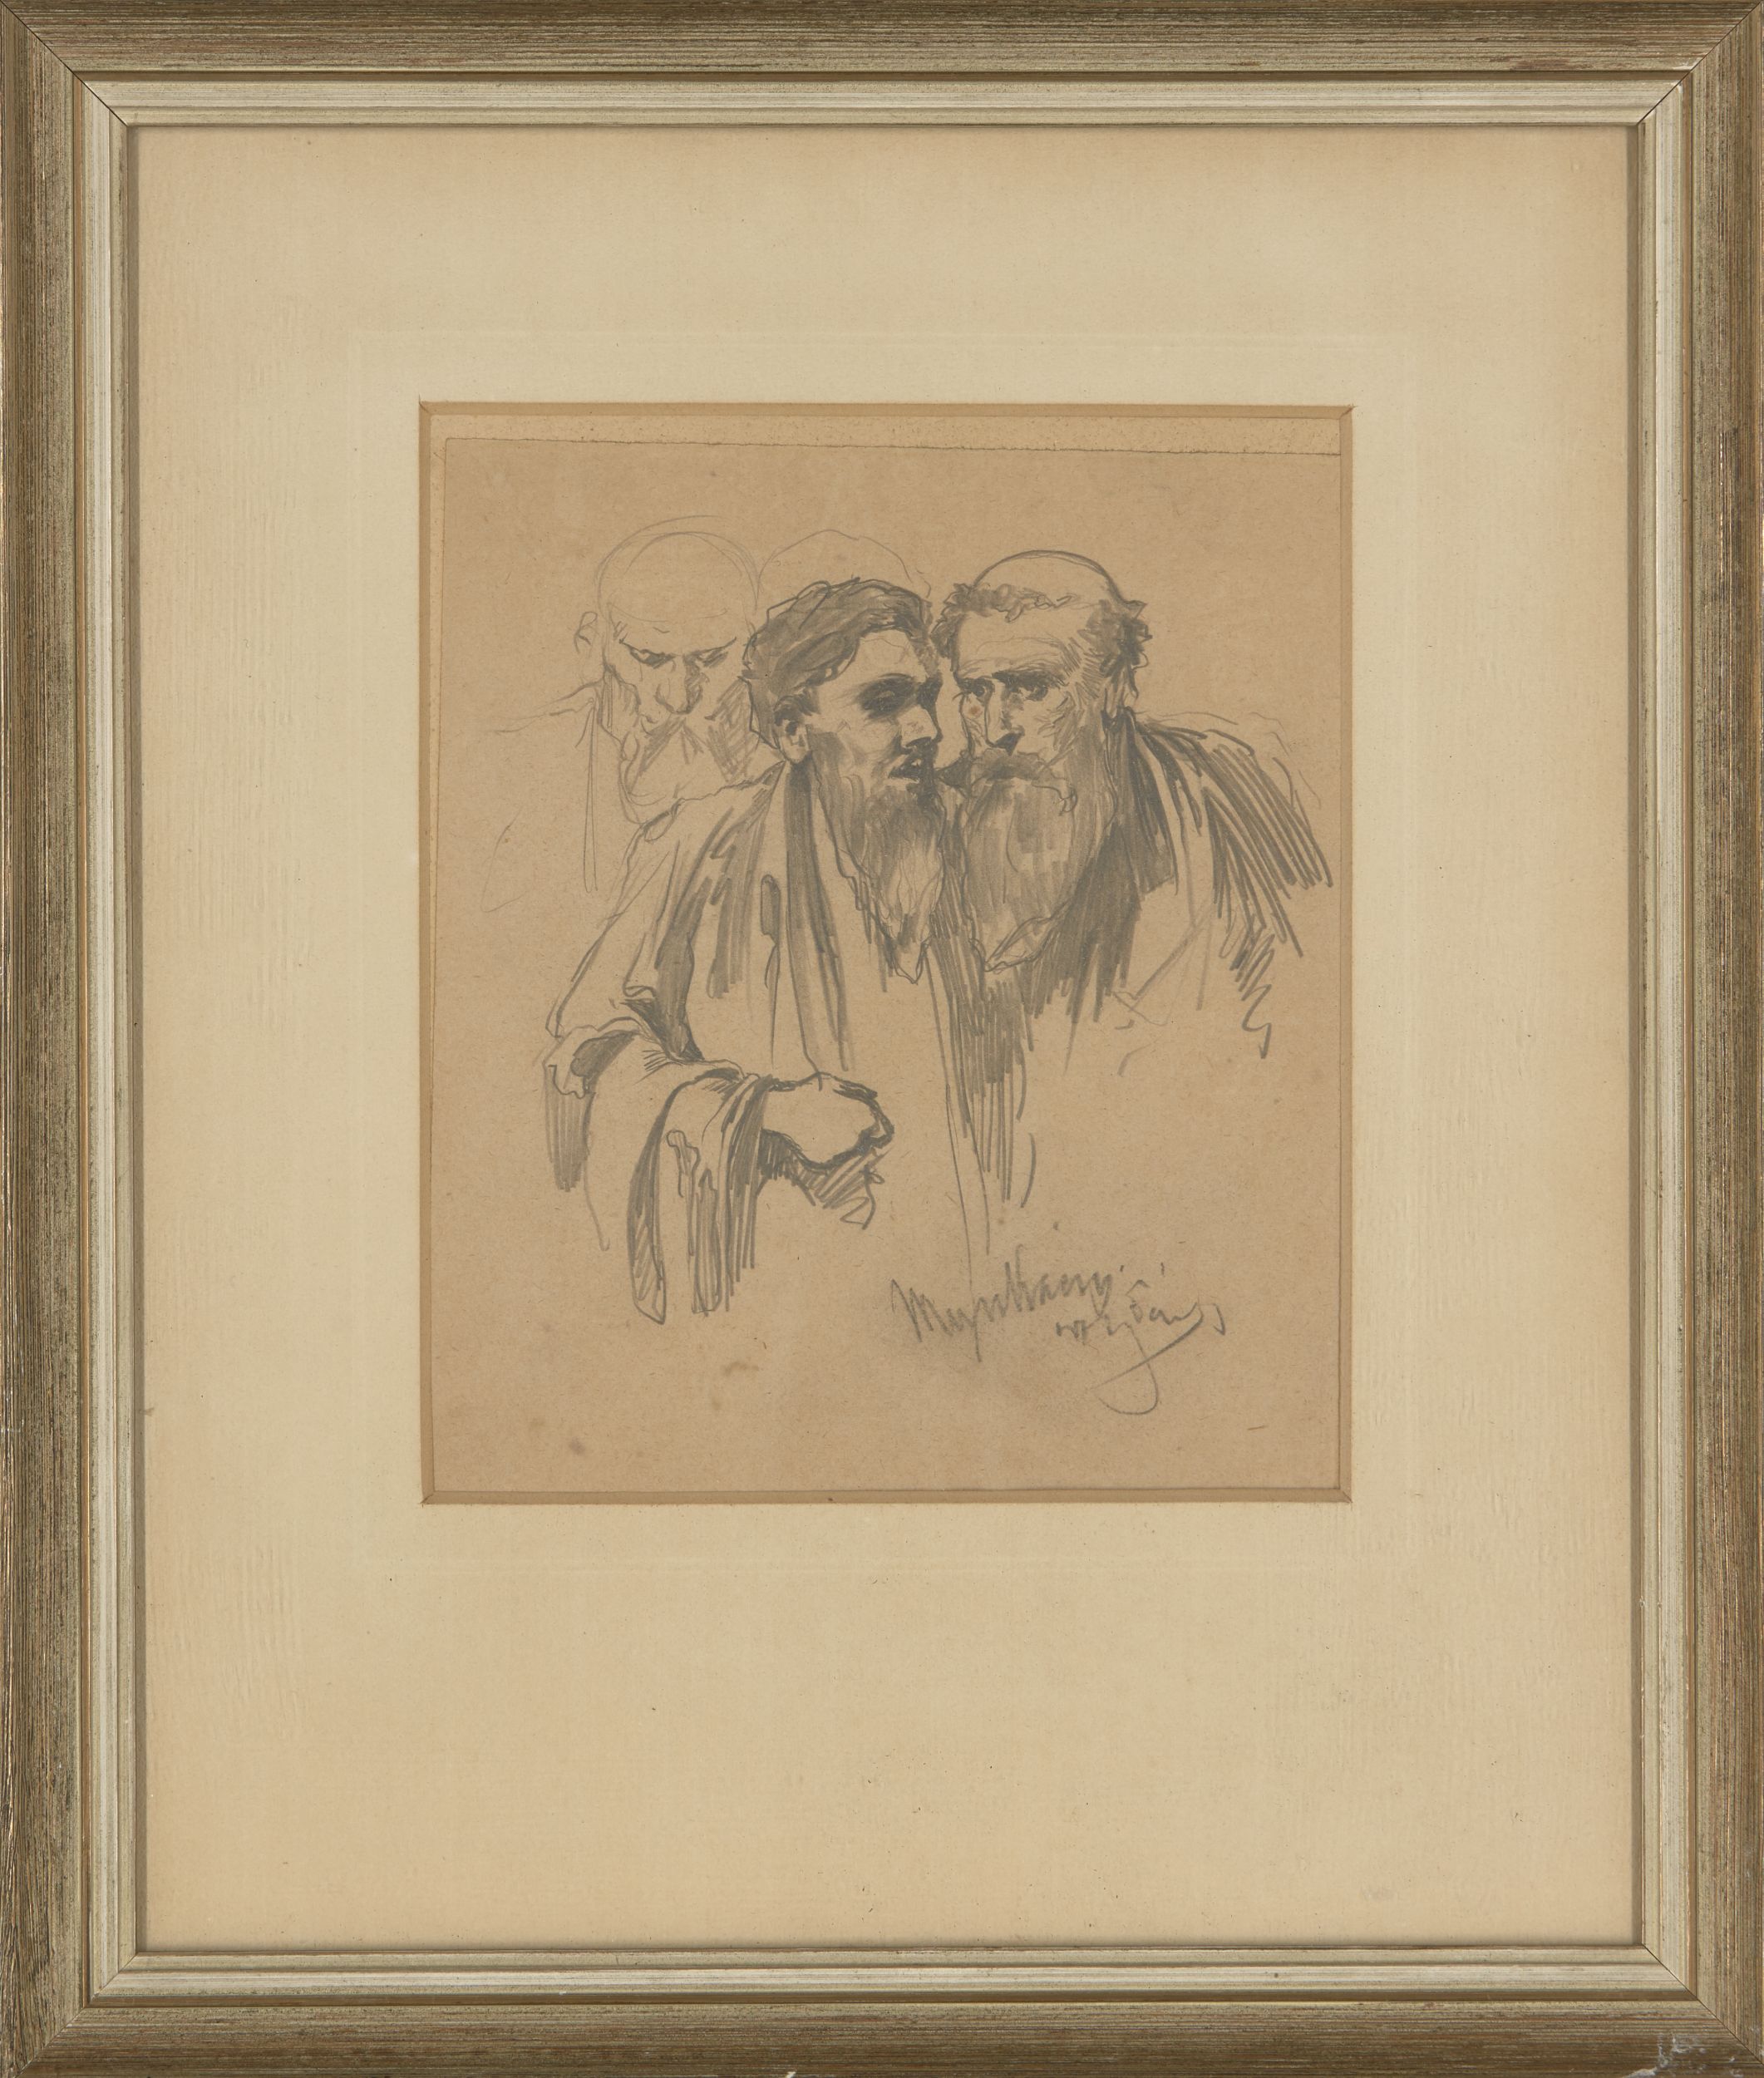 Mihály Munkácsy, Hungarian 1844-1909- Study of men; pencil, signed and inscribed, 20.5x17.5cm - Image 2 of 3